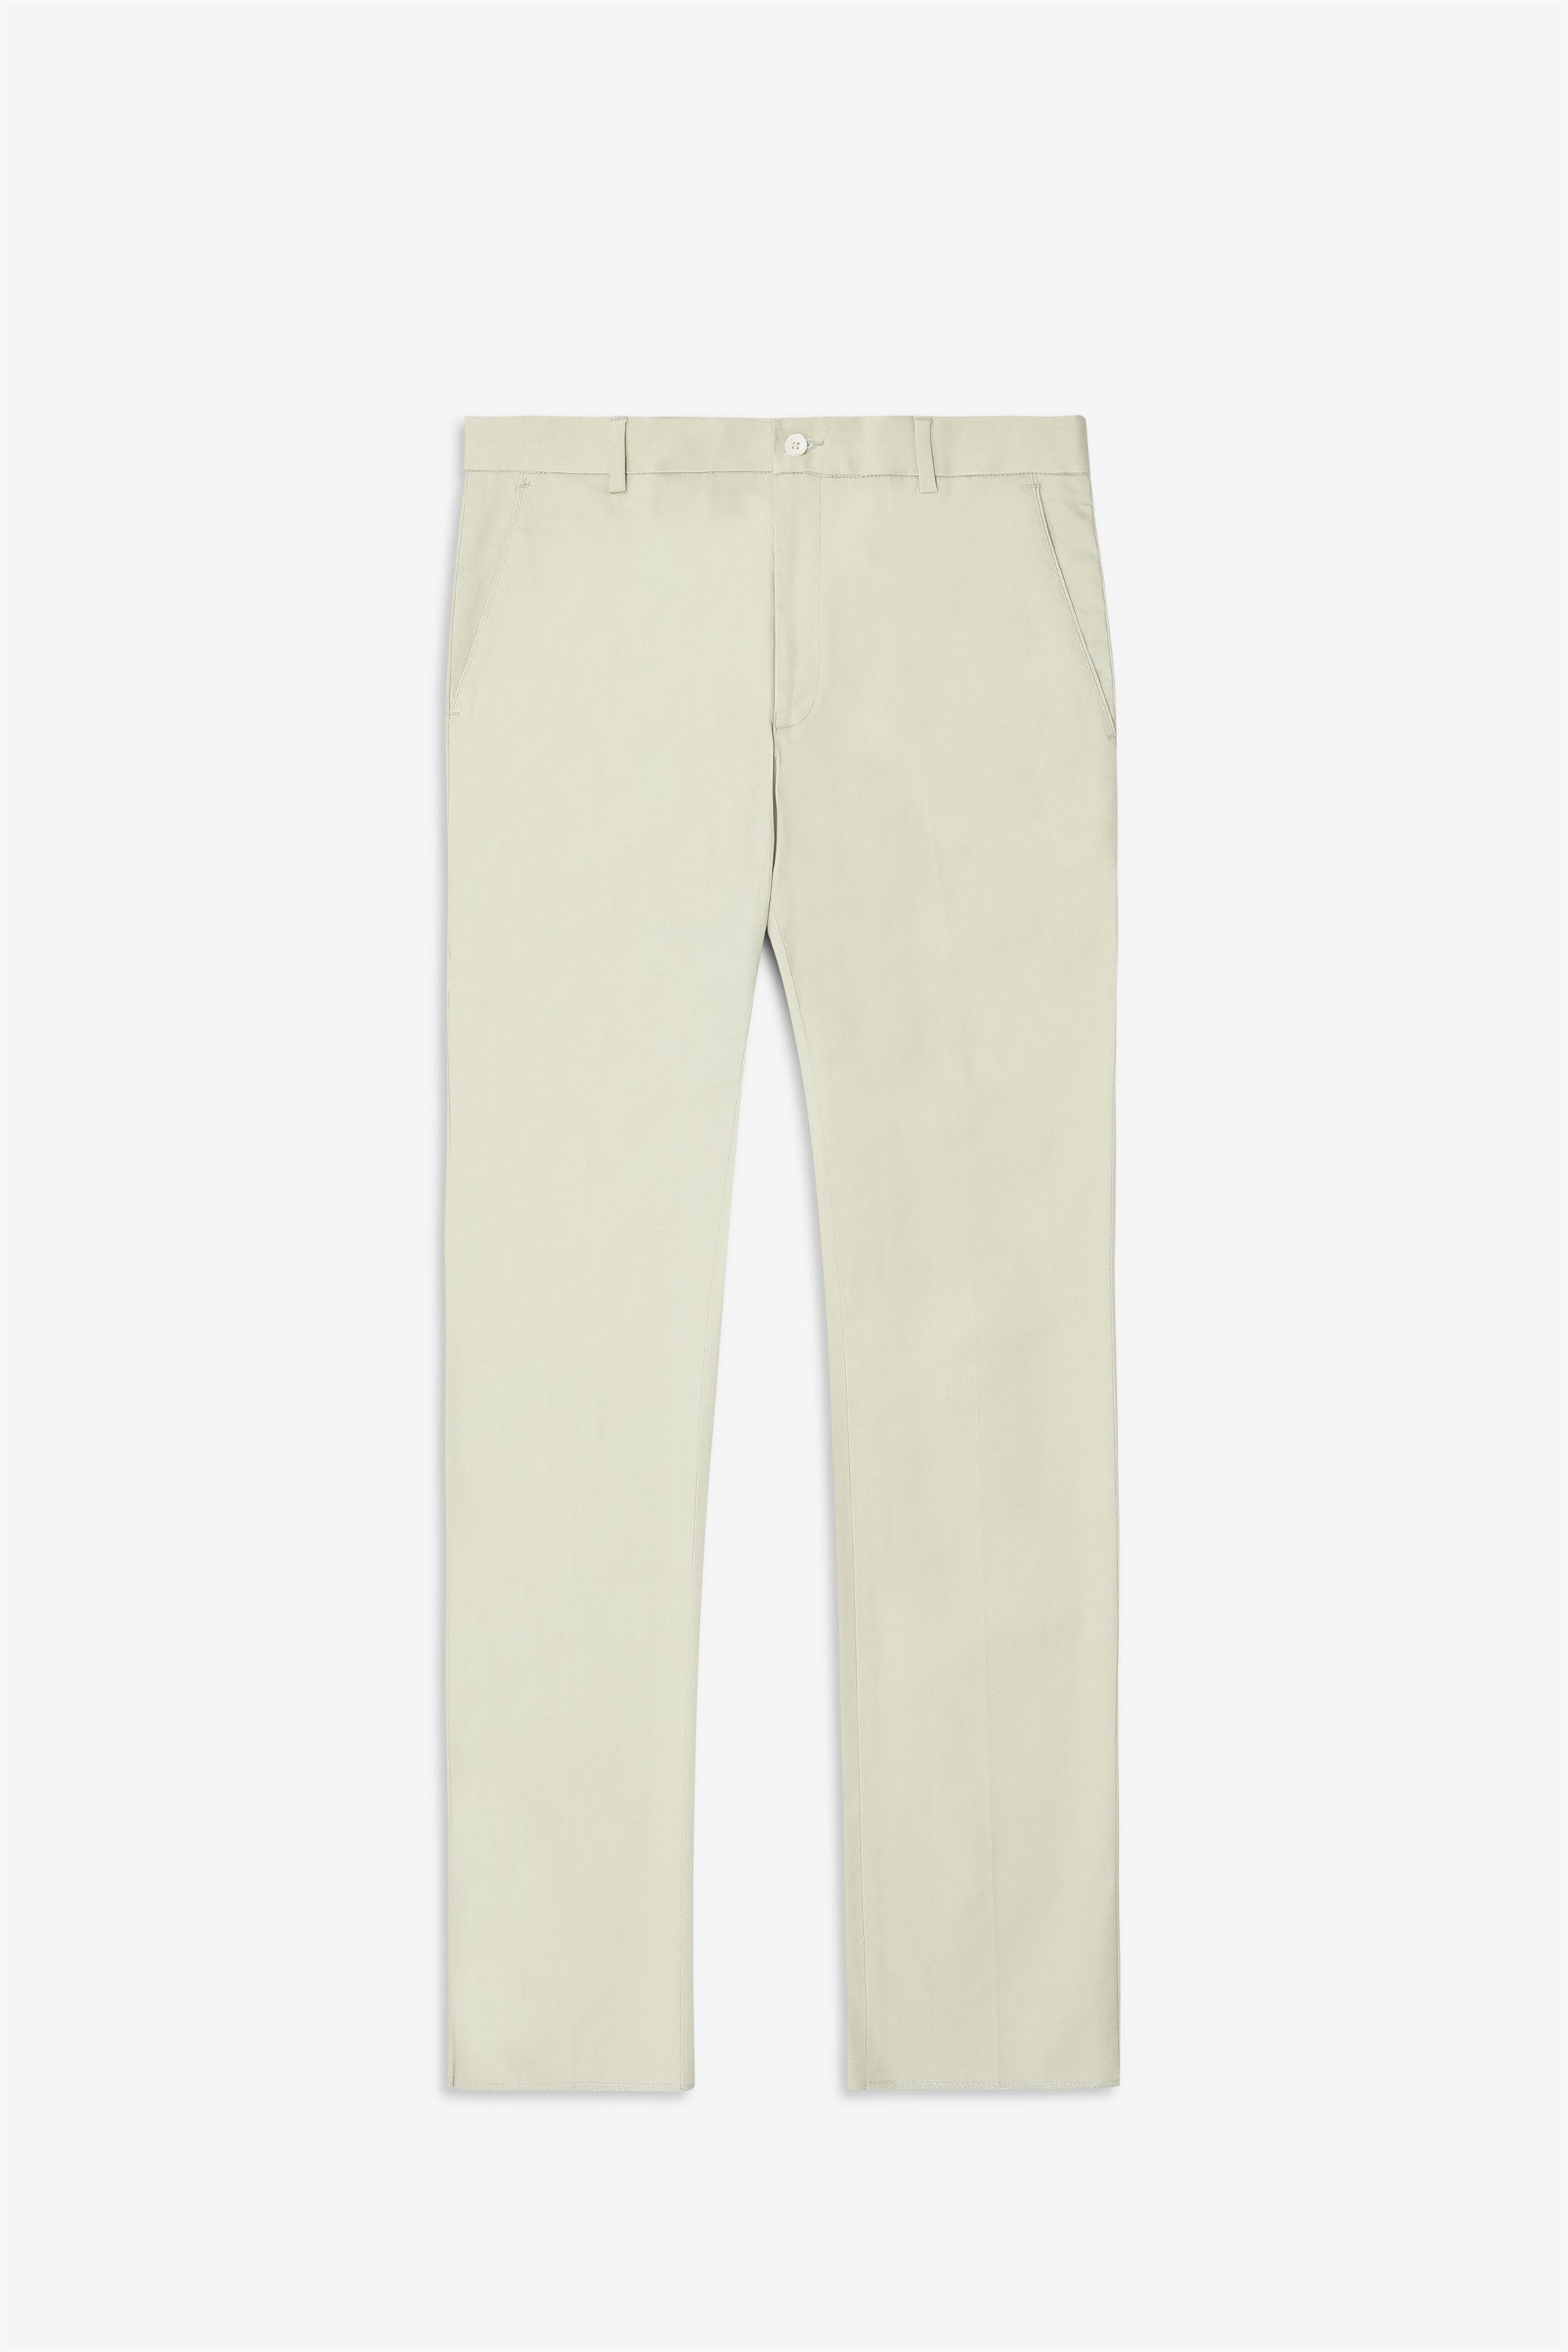 Jainish Light Grey Cotton Tapered Fit Texture Trousers